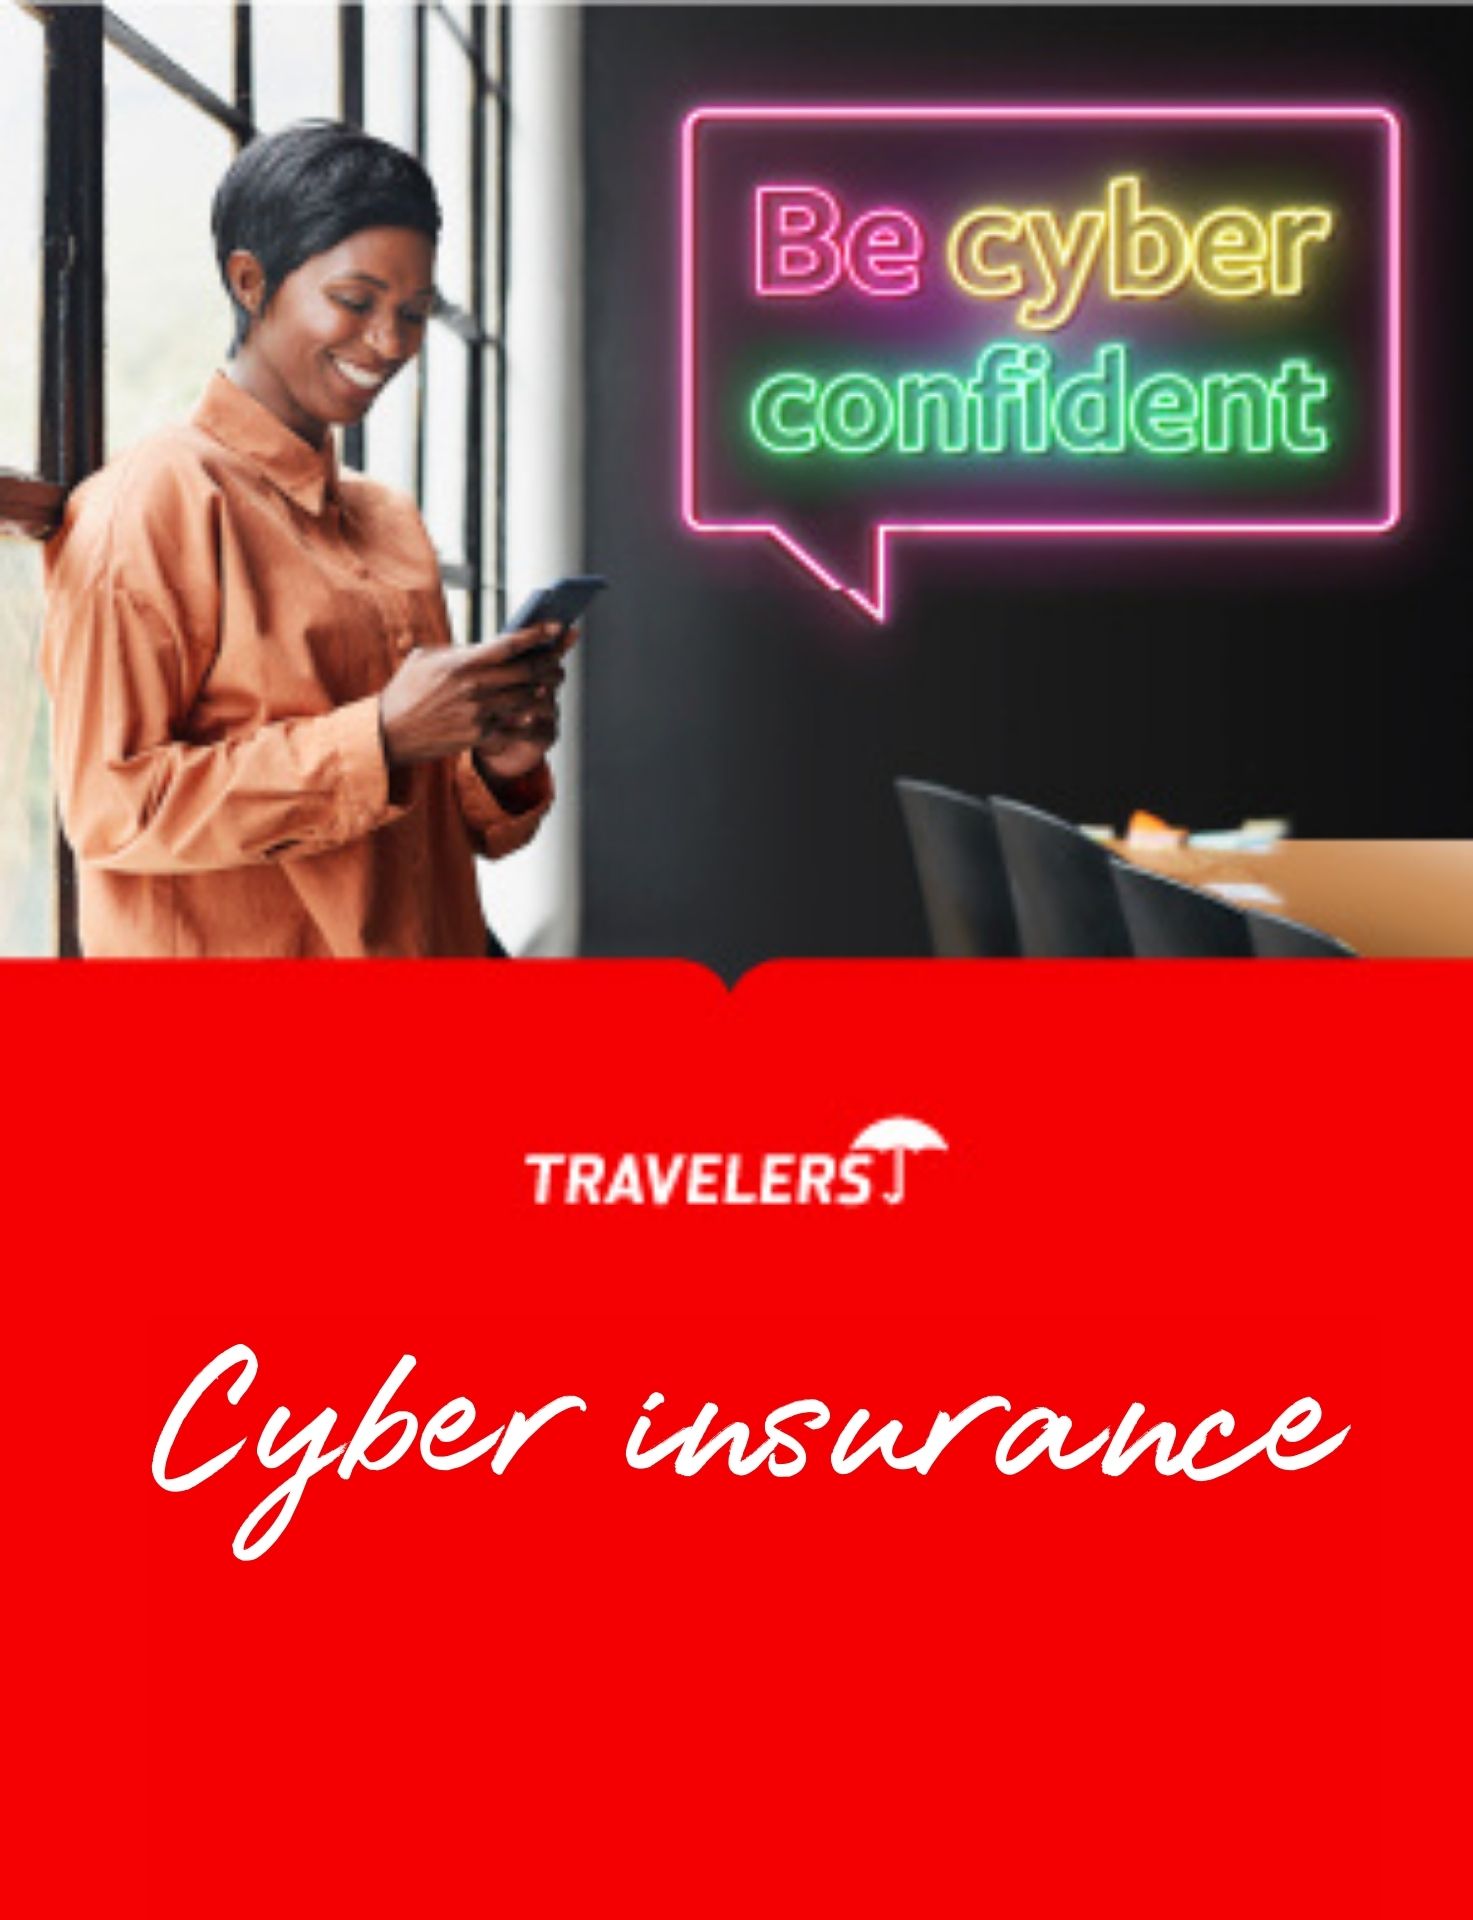 Be cyber confident